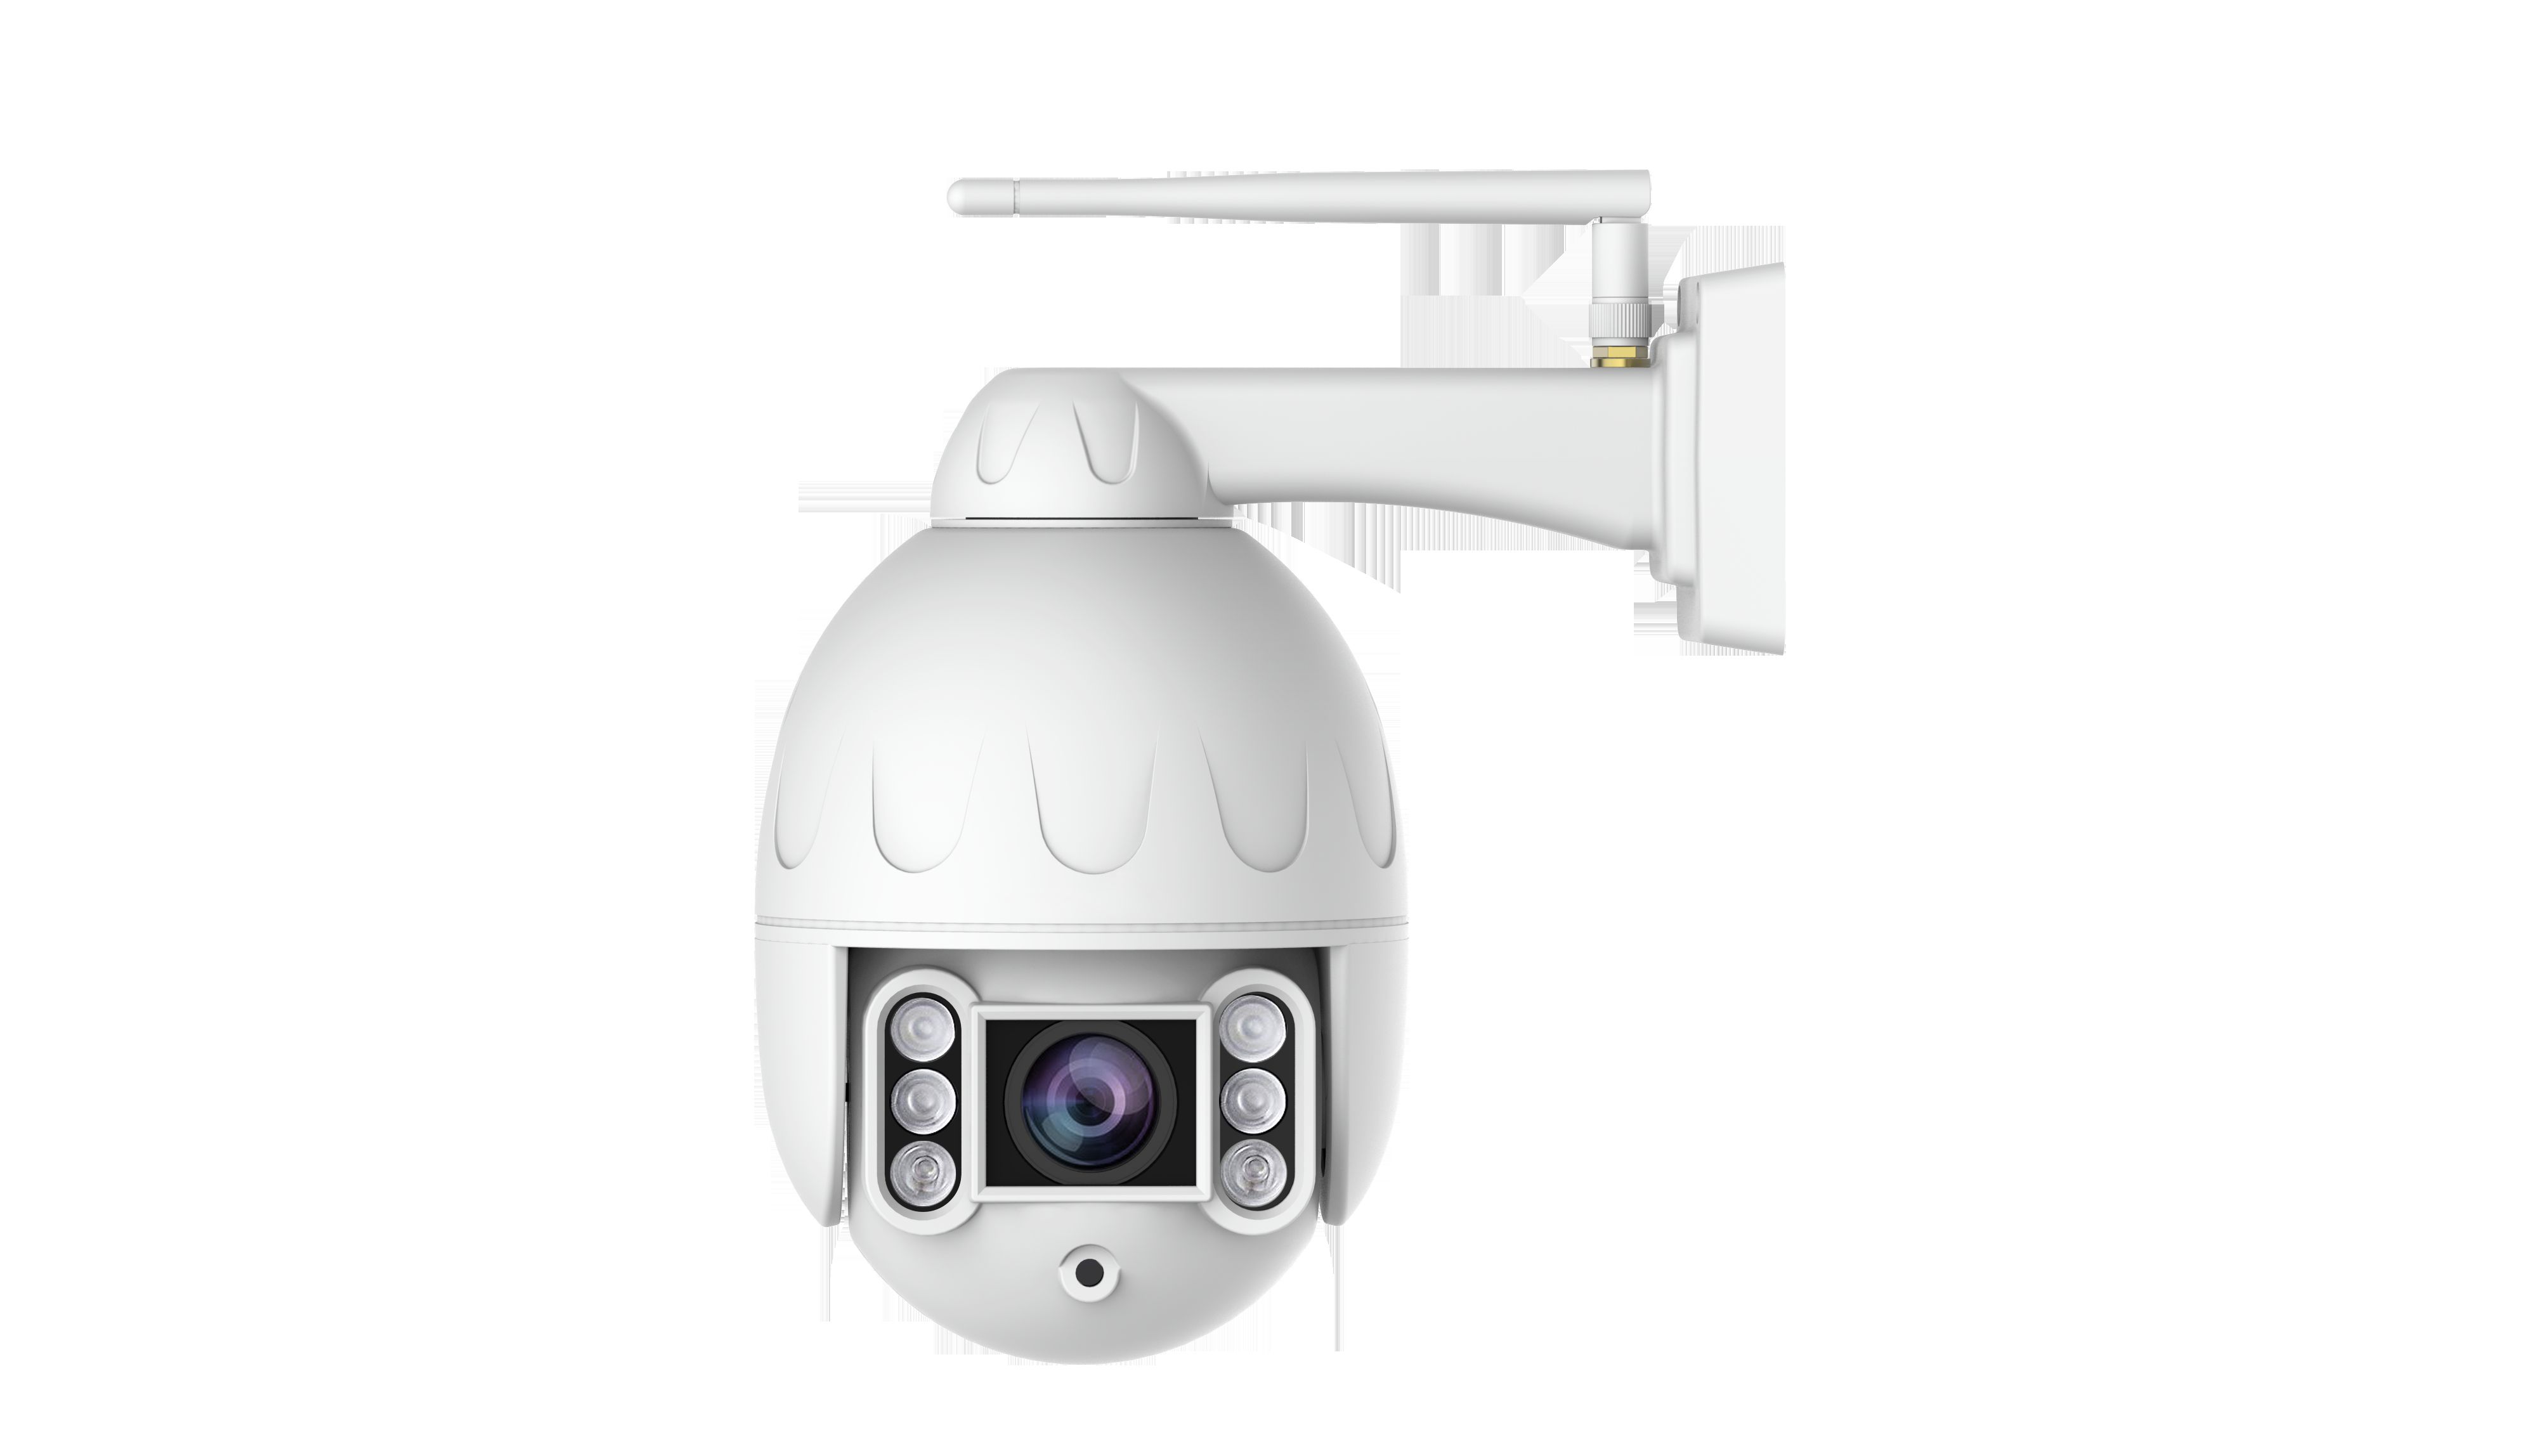 Should wireless surveillance cameras have these features?